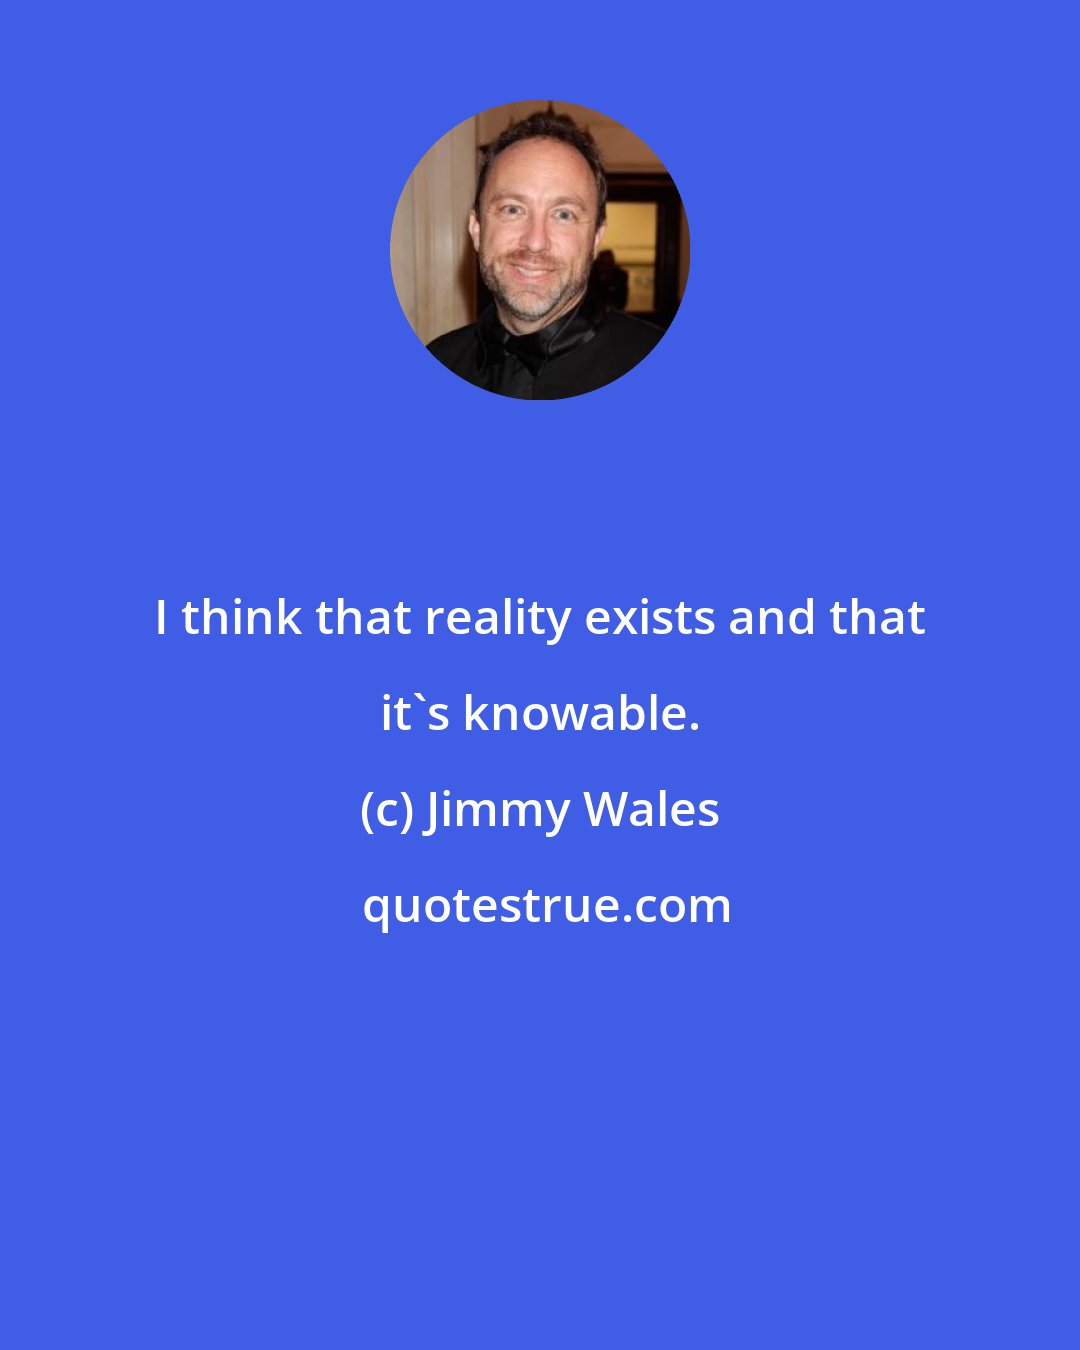 Jimmy Wales: I think that reality exists and that it's knowable.